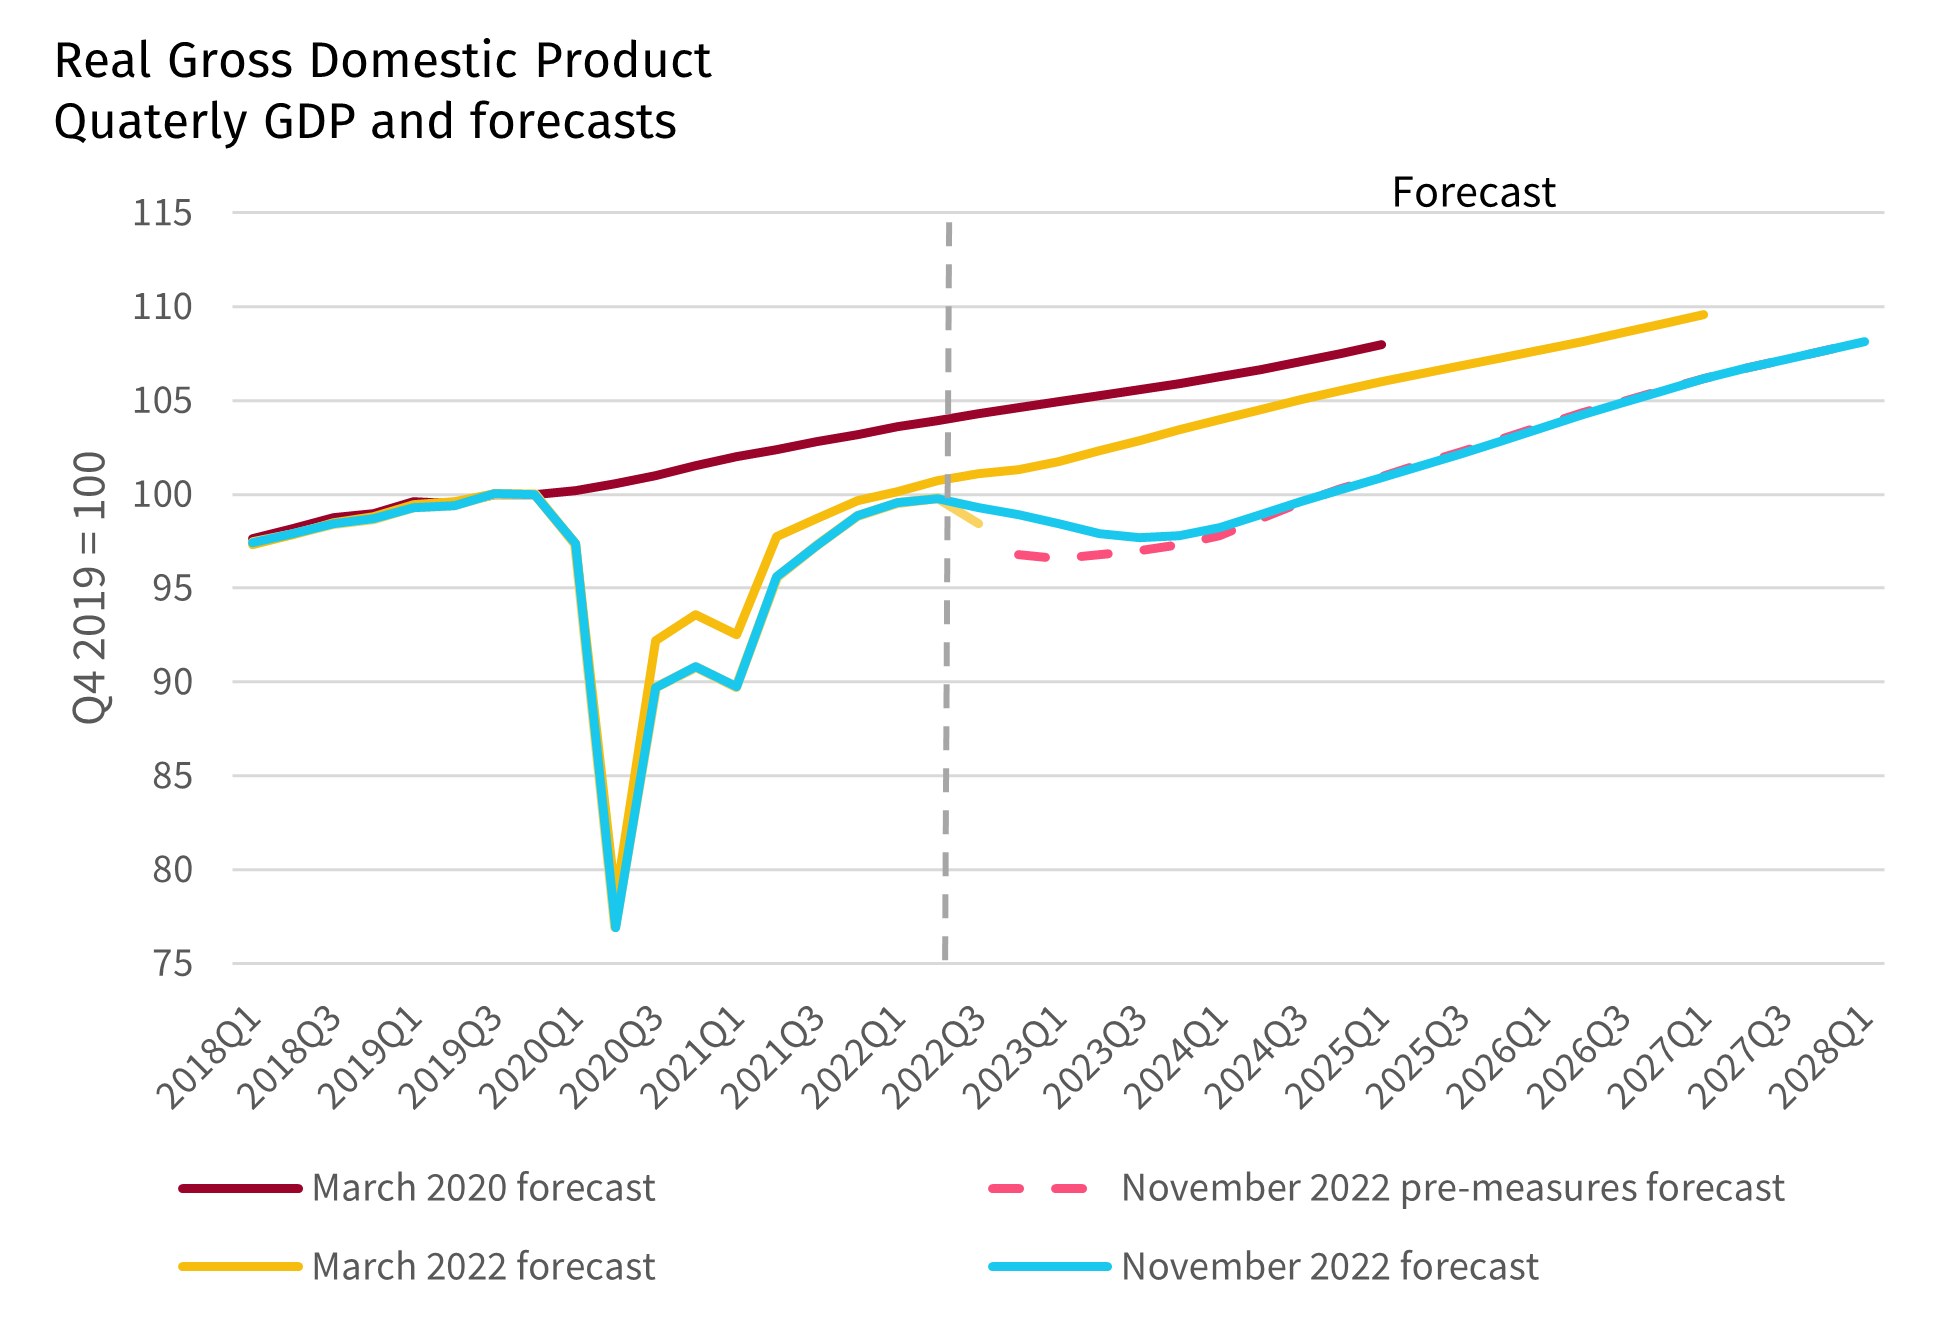 Line chart showing OBR forecasts for UK Real GDP in March 2020, March 2022 and November 2022.